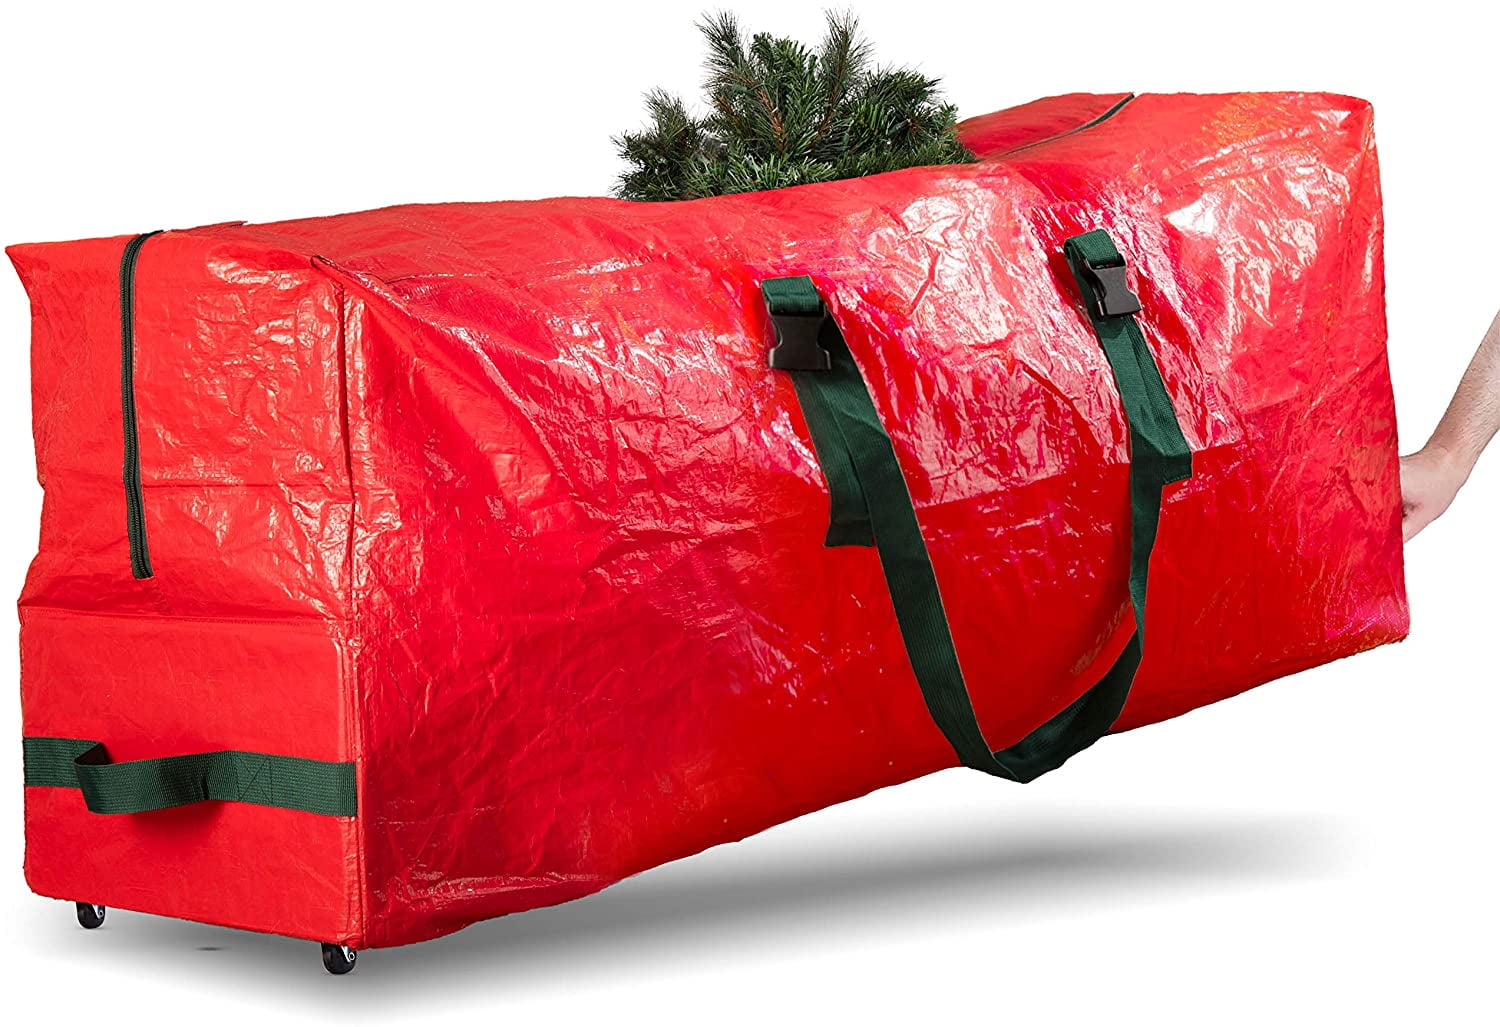 Rolling Large Christmas Tree Storage Bag - Fits Artificial Disassembled Trees, Durable Handles & Wheels for Easy Carrying and Transport - Tear/Waterproof Polyethylene Plastic Duffle Bag (7.5 Ft., Red)